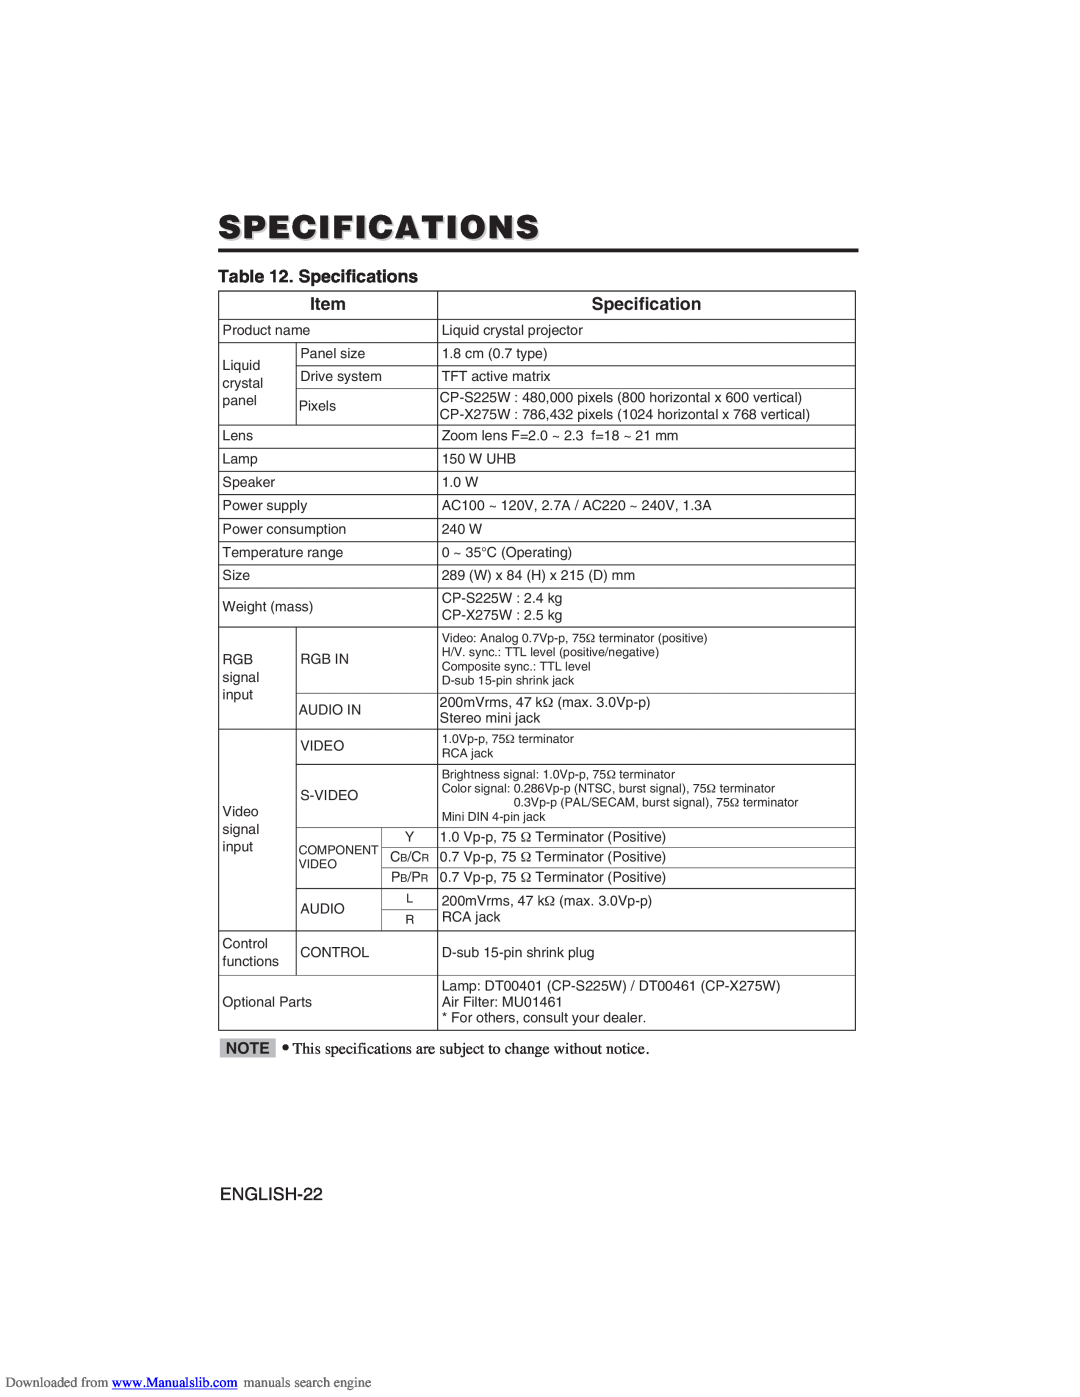 Hitachi CP-X275W user manual Specifications, Item 